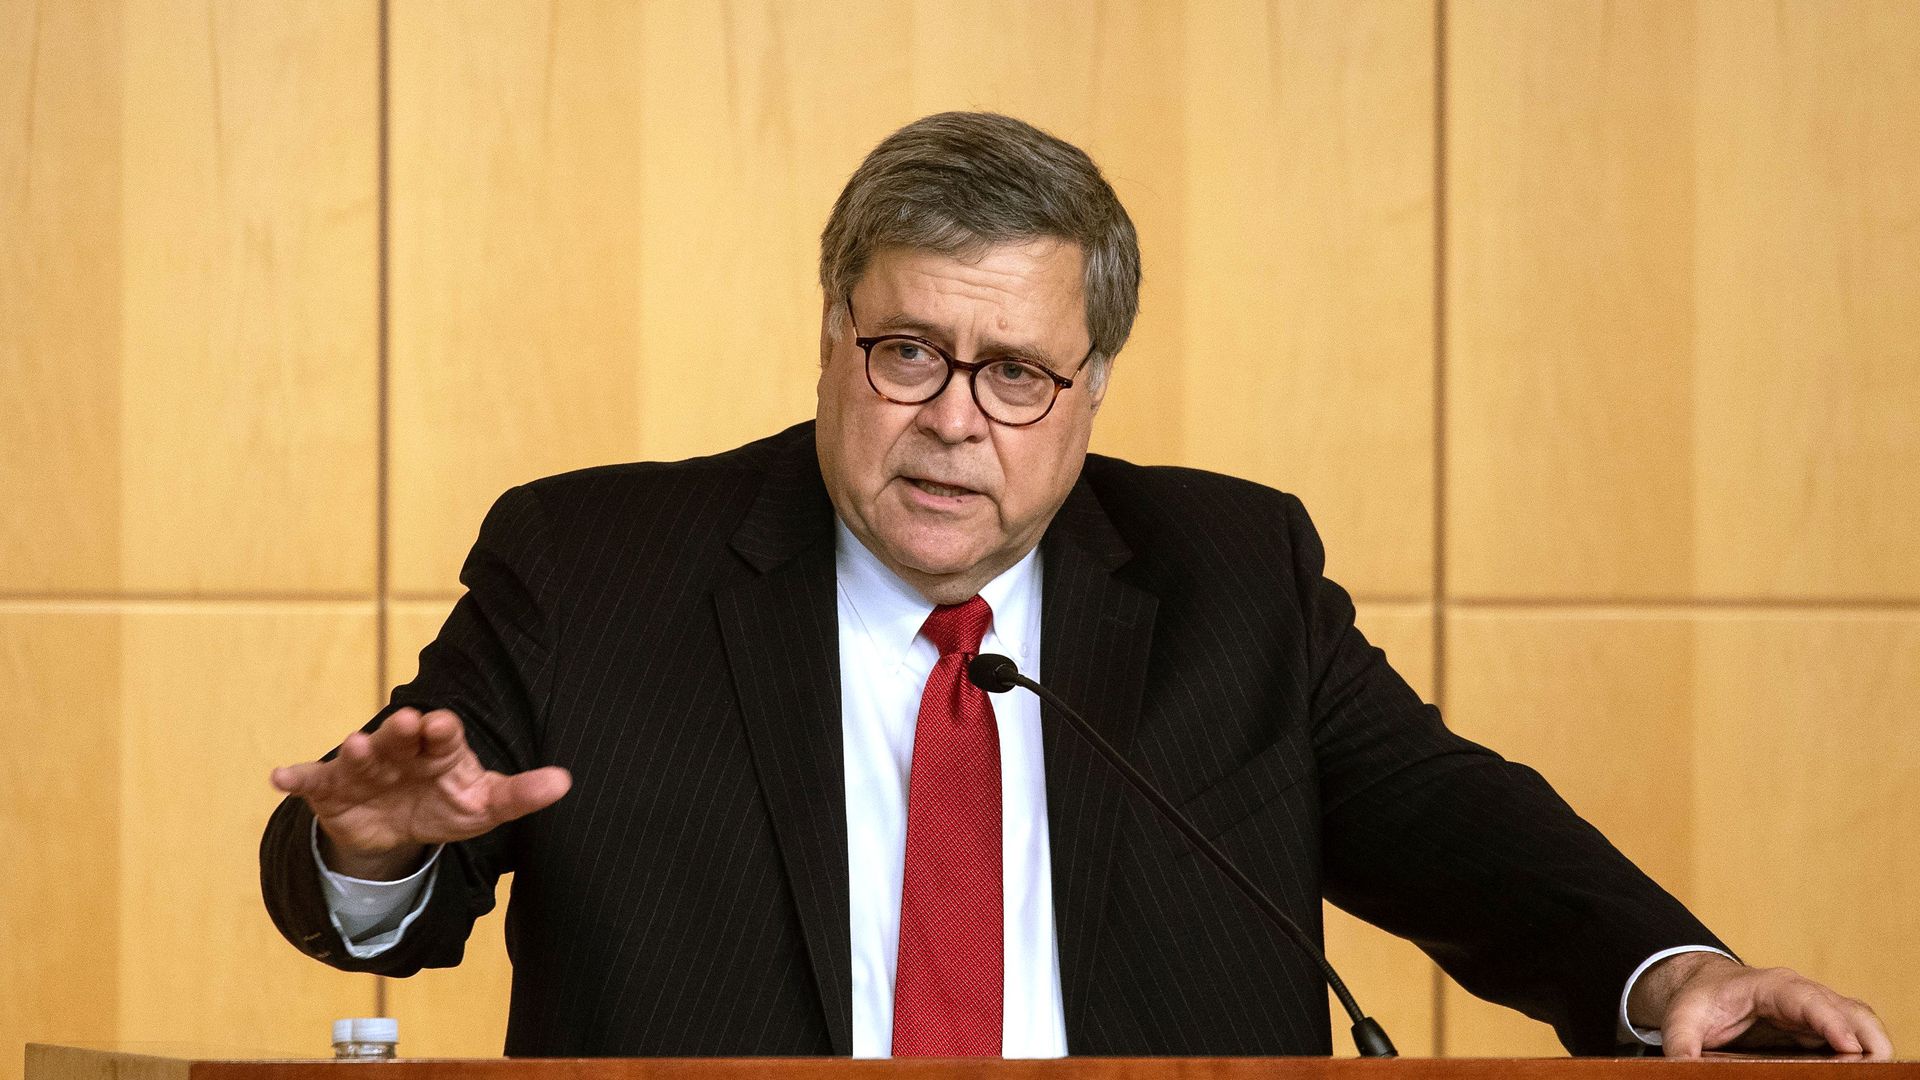 In this image, Barr speaks in a suit and tie from behind a podium.